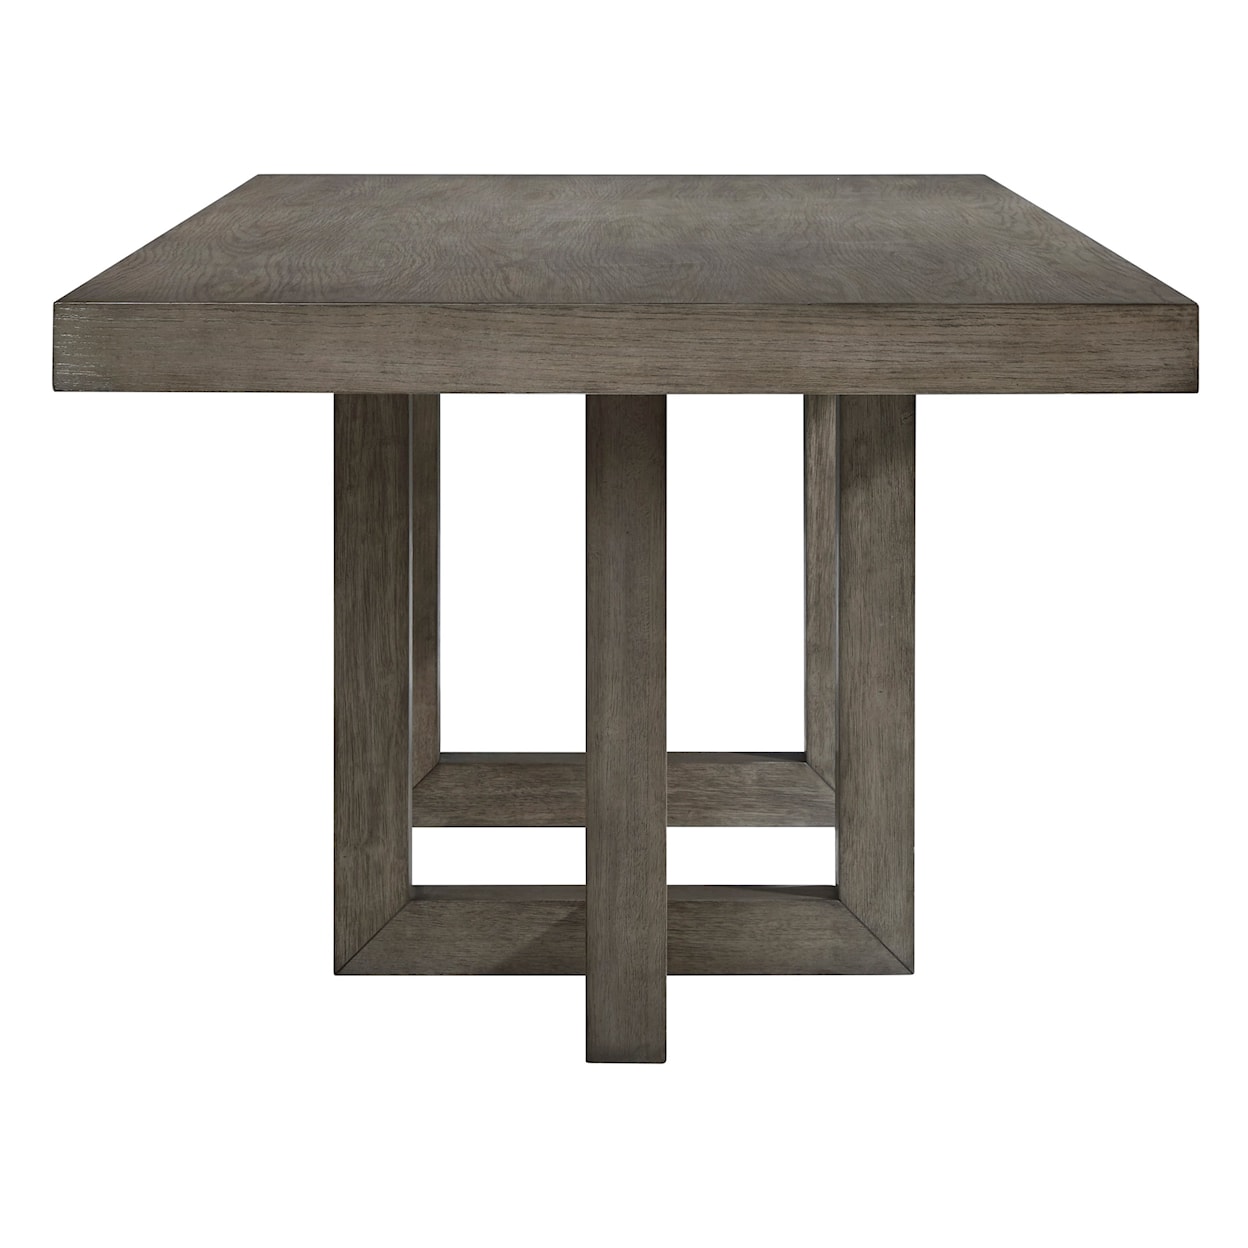 Benchcraft Anibecca Dining Table